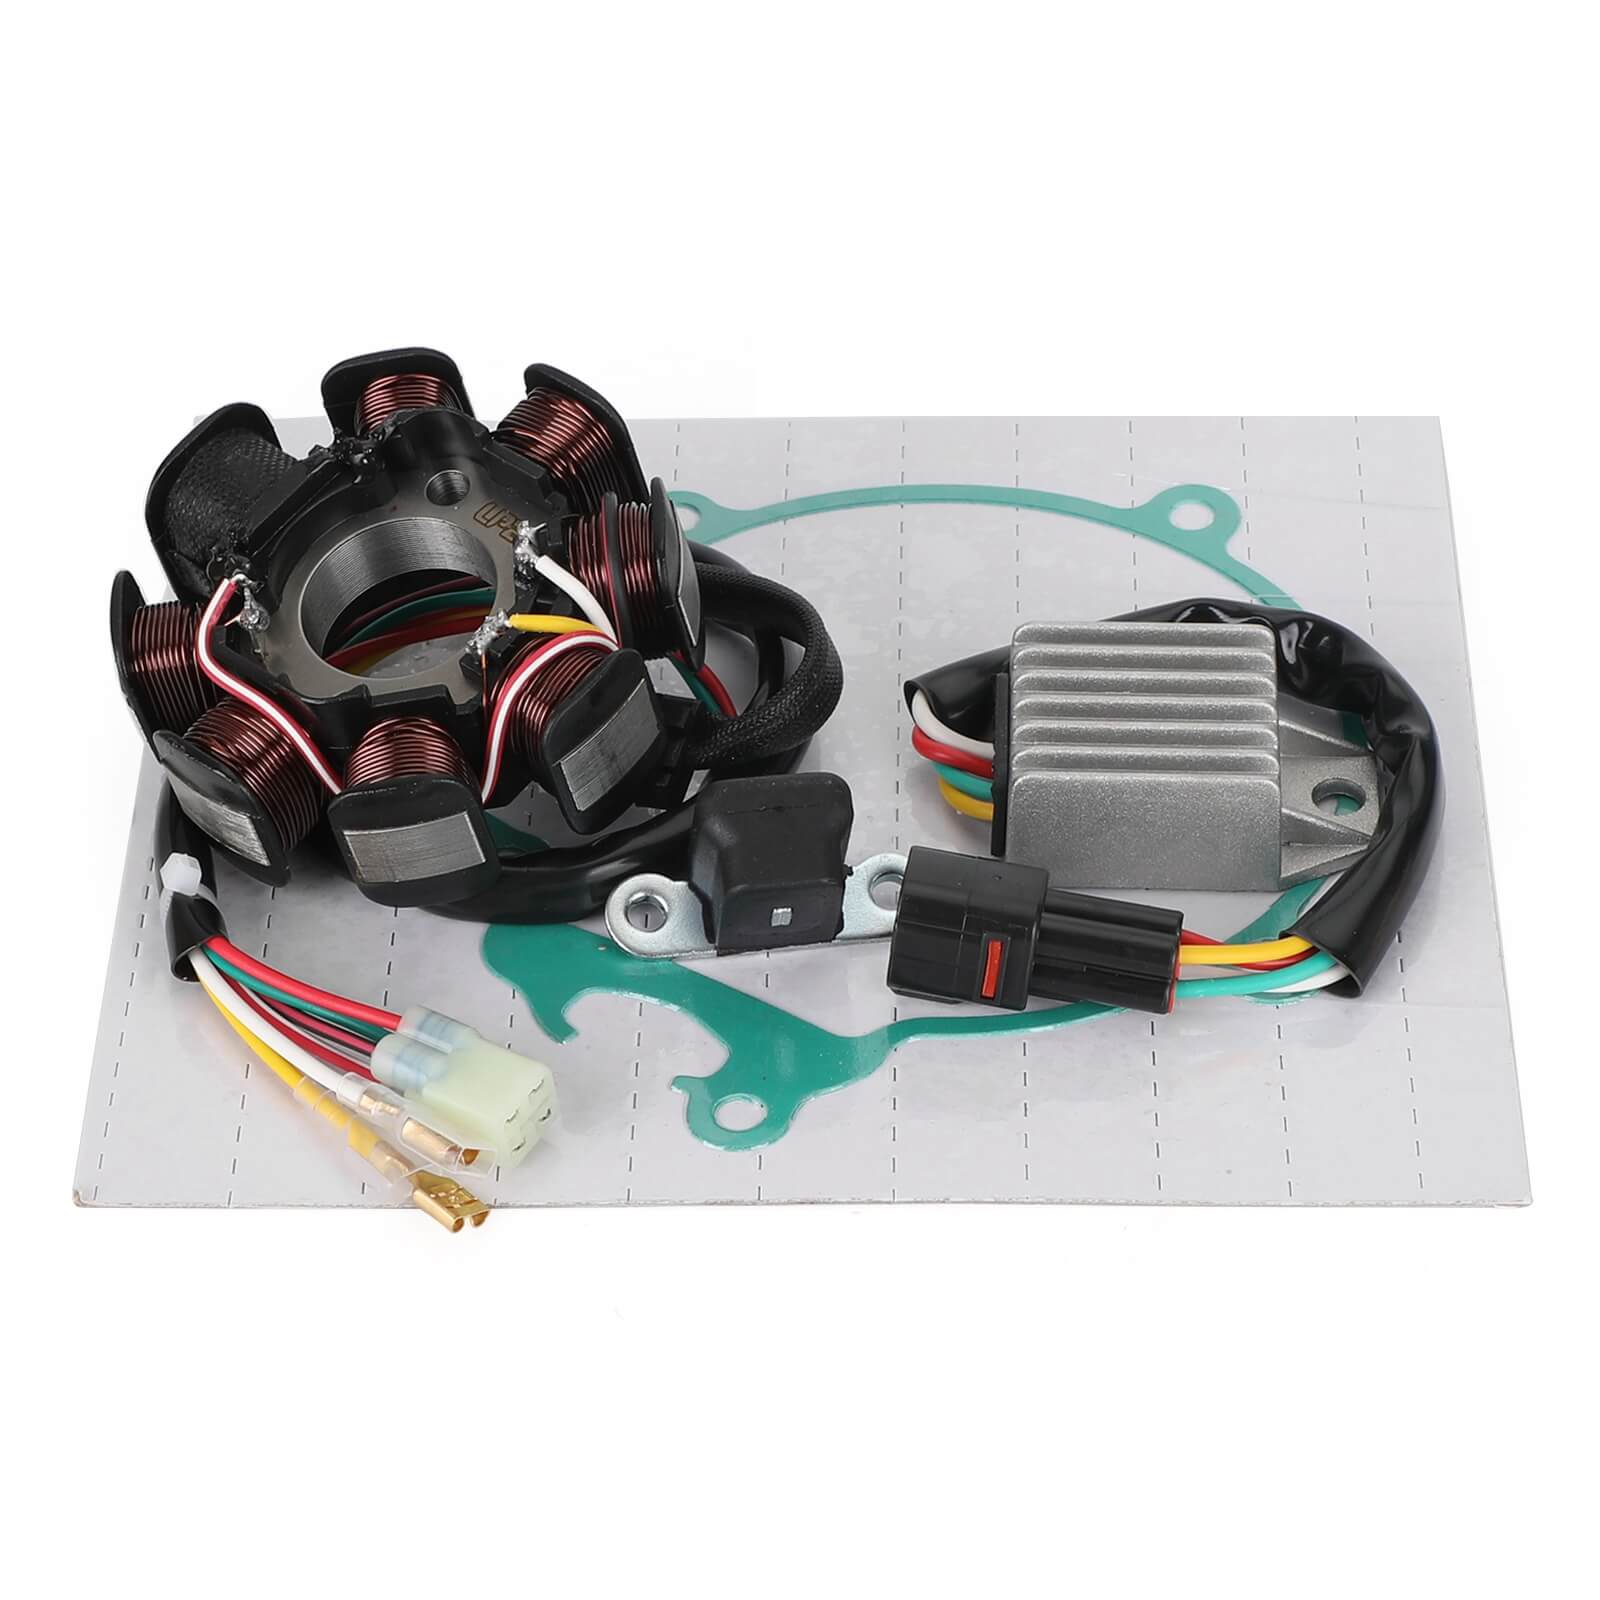 Magneto Coil Stator + Voltage Regulator + Gasket Assy Fit for 250 XC 250 XC-W 09-16 300 EXC Factory Edition 2011/2015